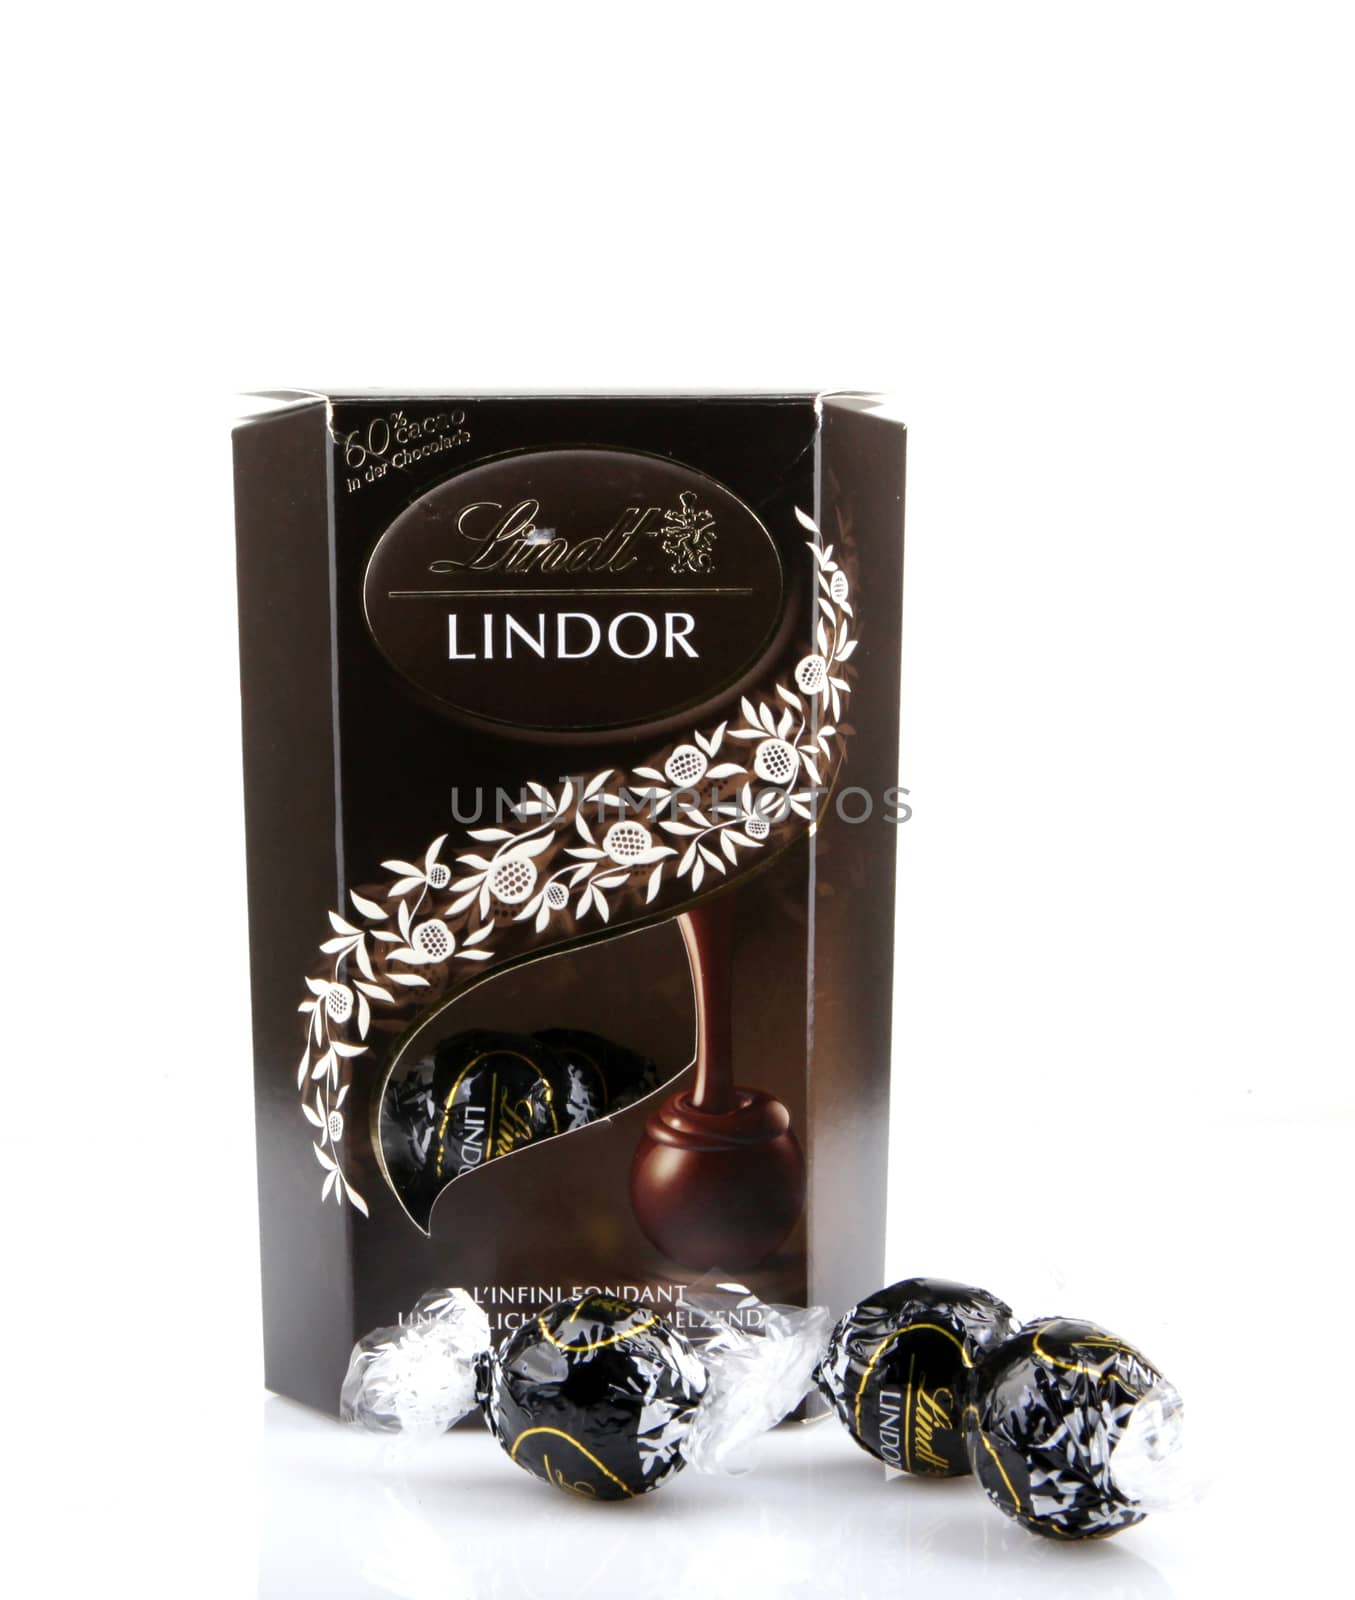 AYTOS, BULGARIA - APRIL 03, 2016: Milk Chocolate LINDOR truffle. Lindt is recognized as a leader in the market for premium quality chocolate. by nenov